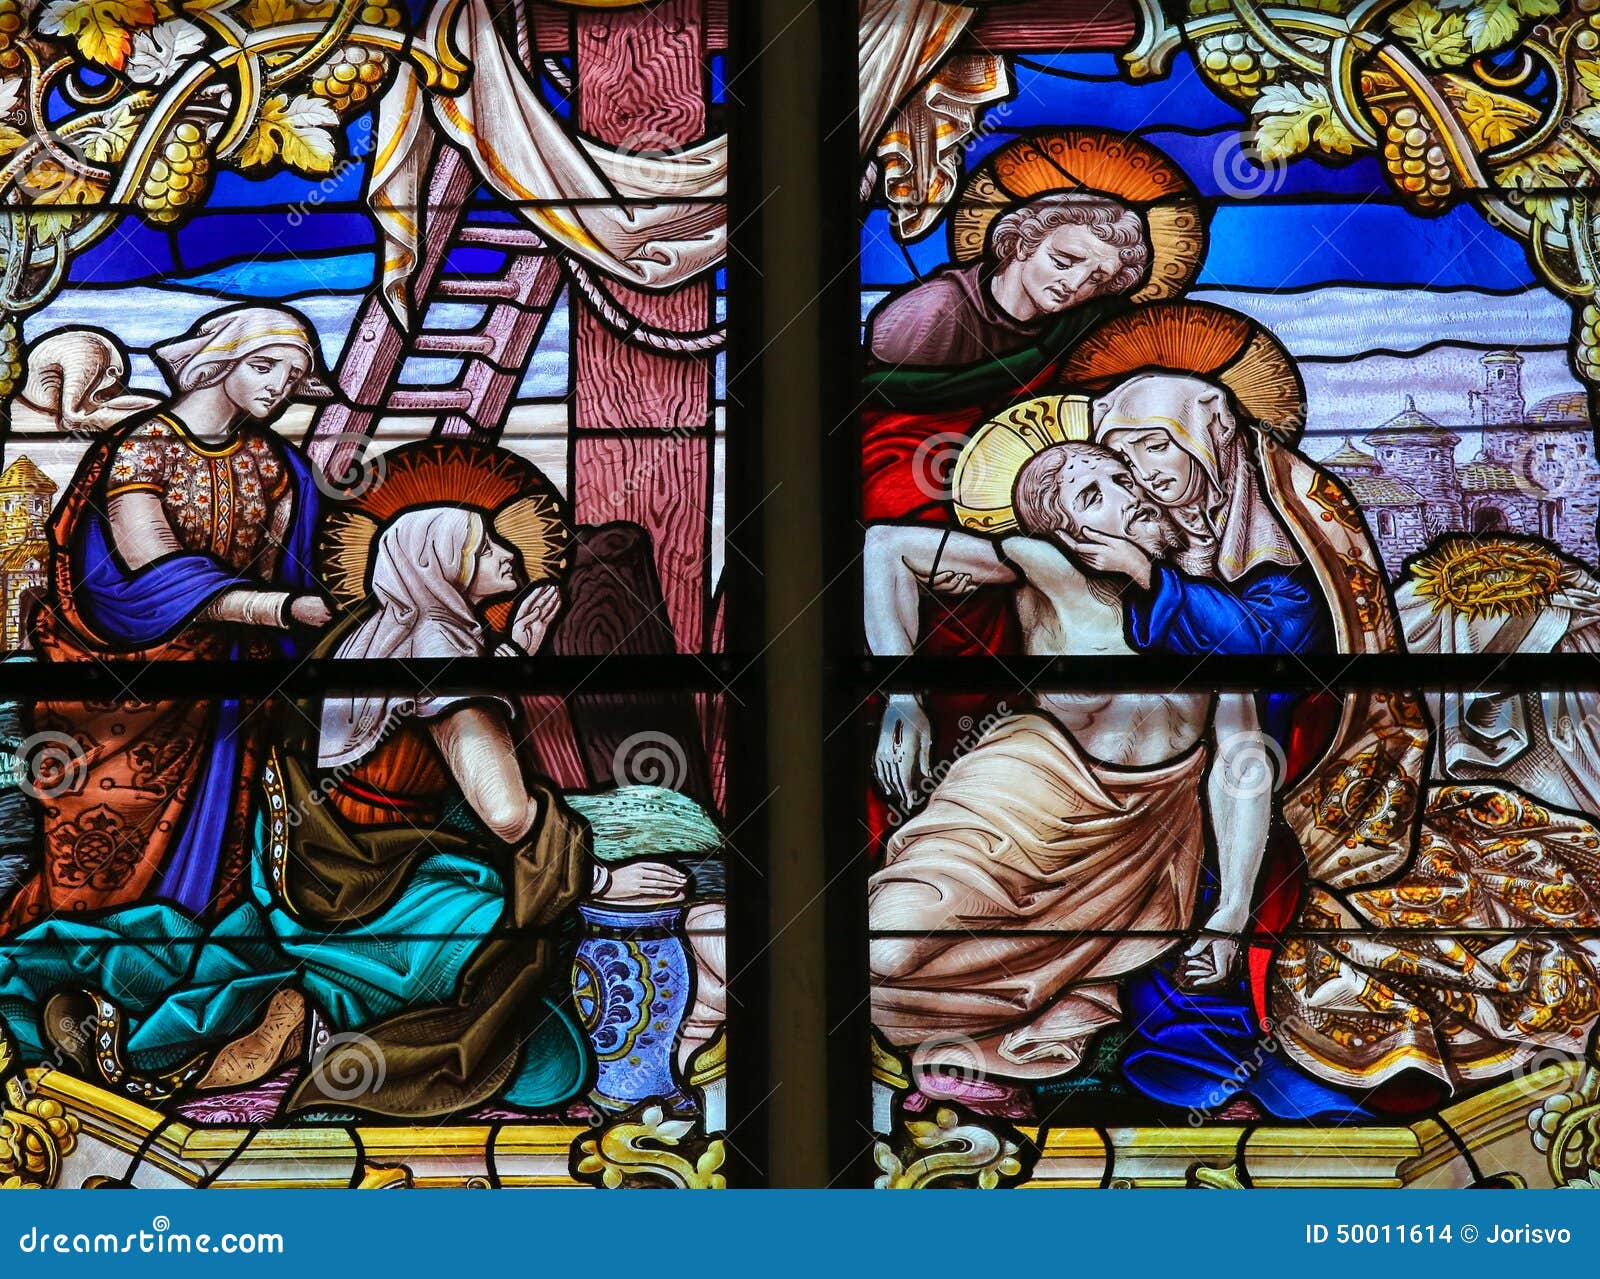 jesus taken from the cross - stained glass - good friday